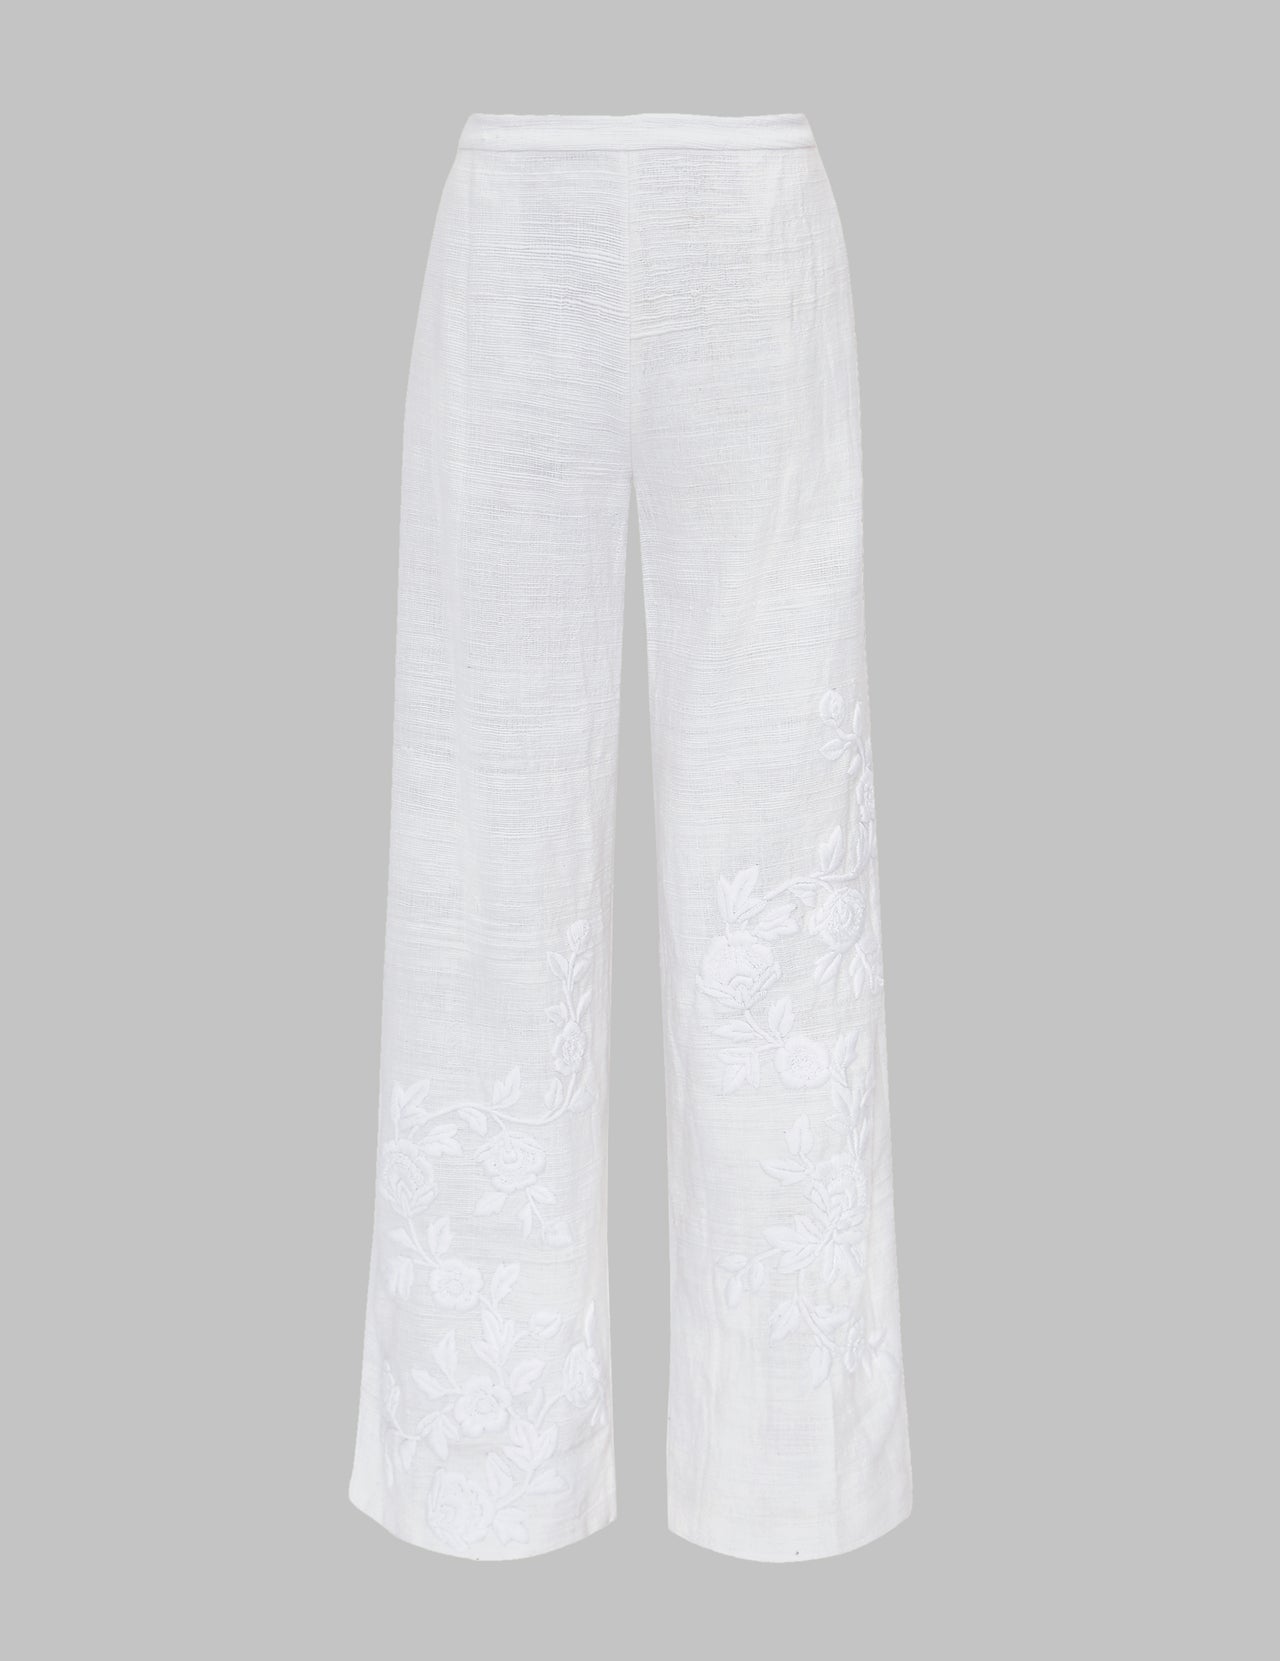  White Handwoven Cotton Embroidered Trousers 